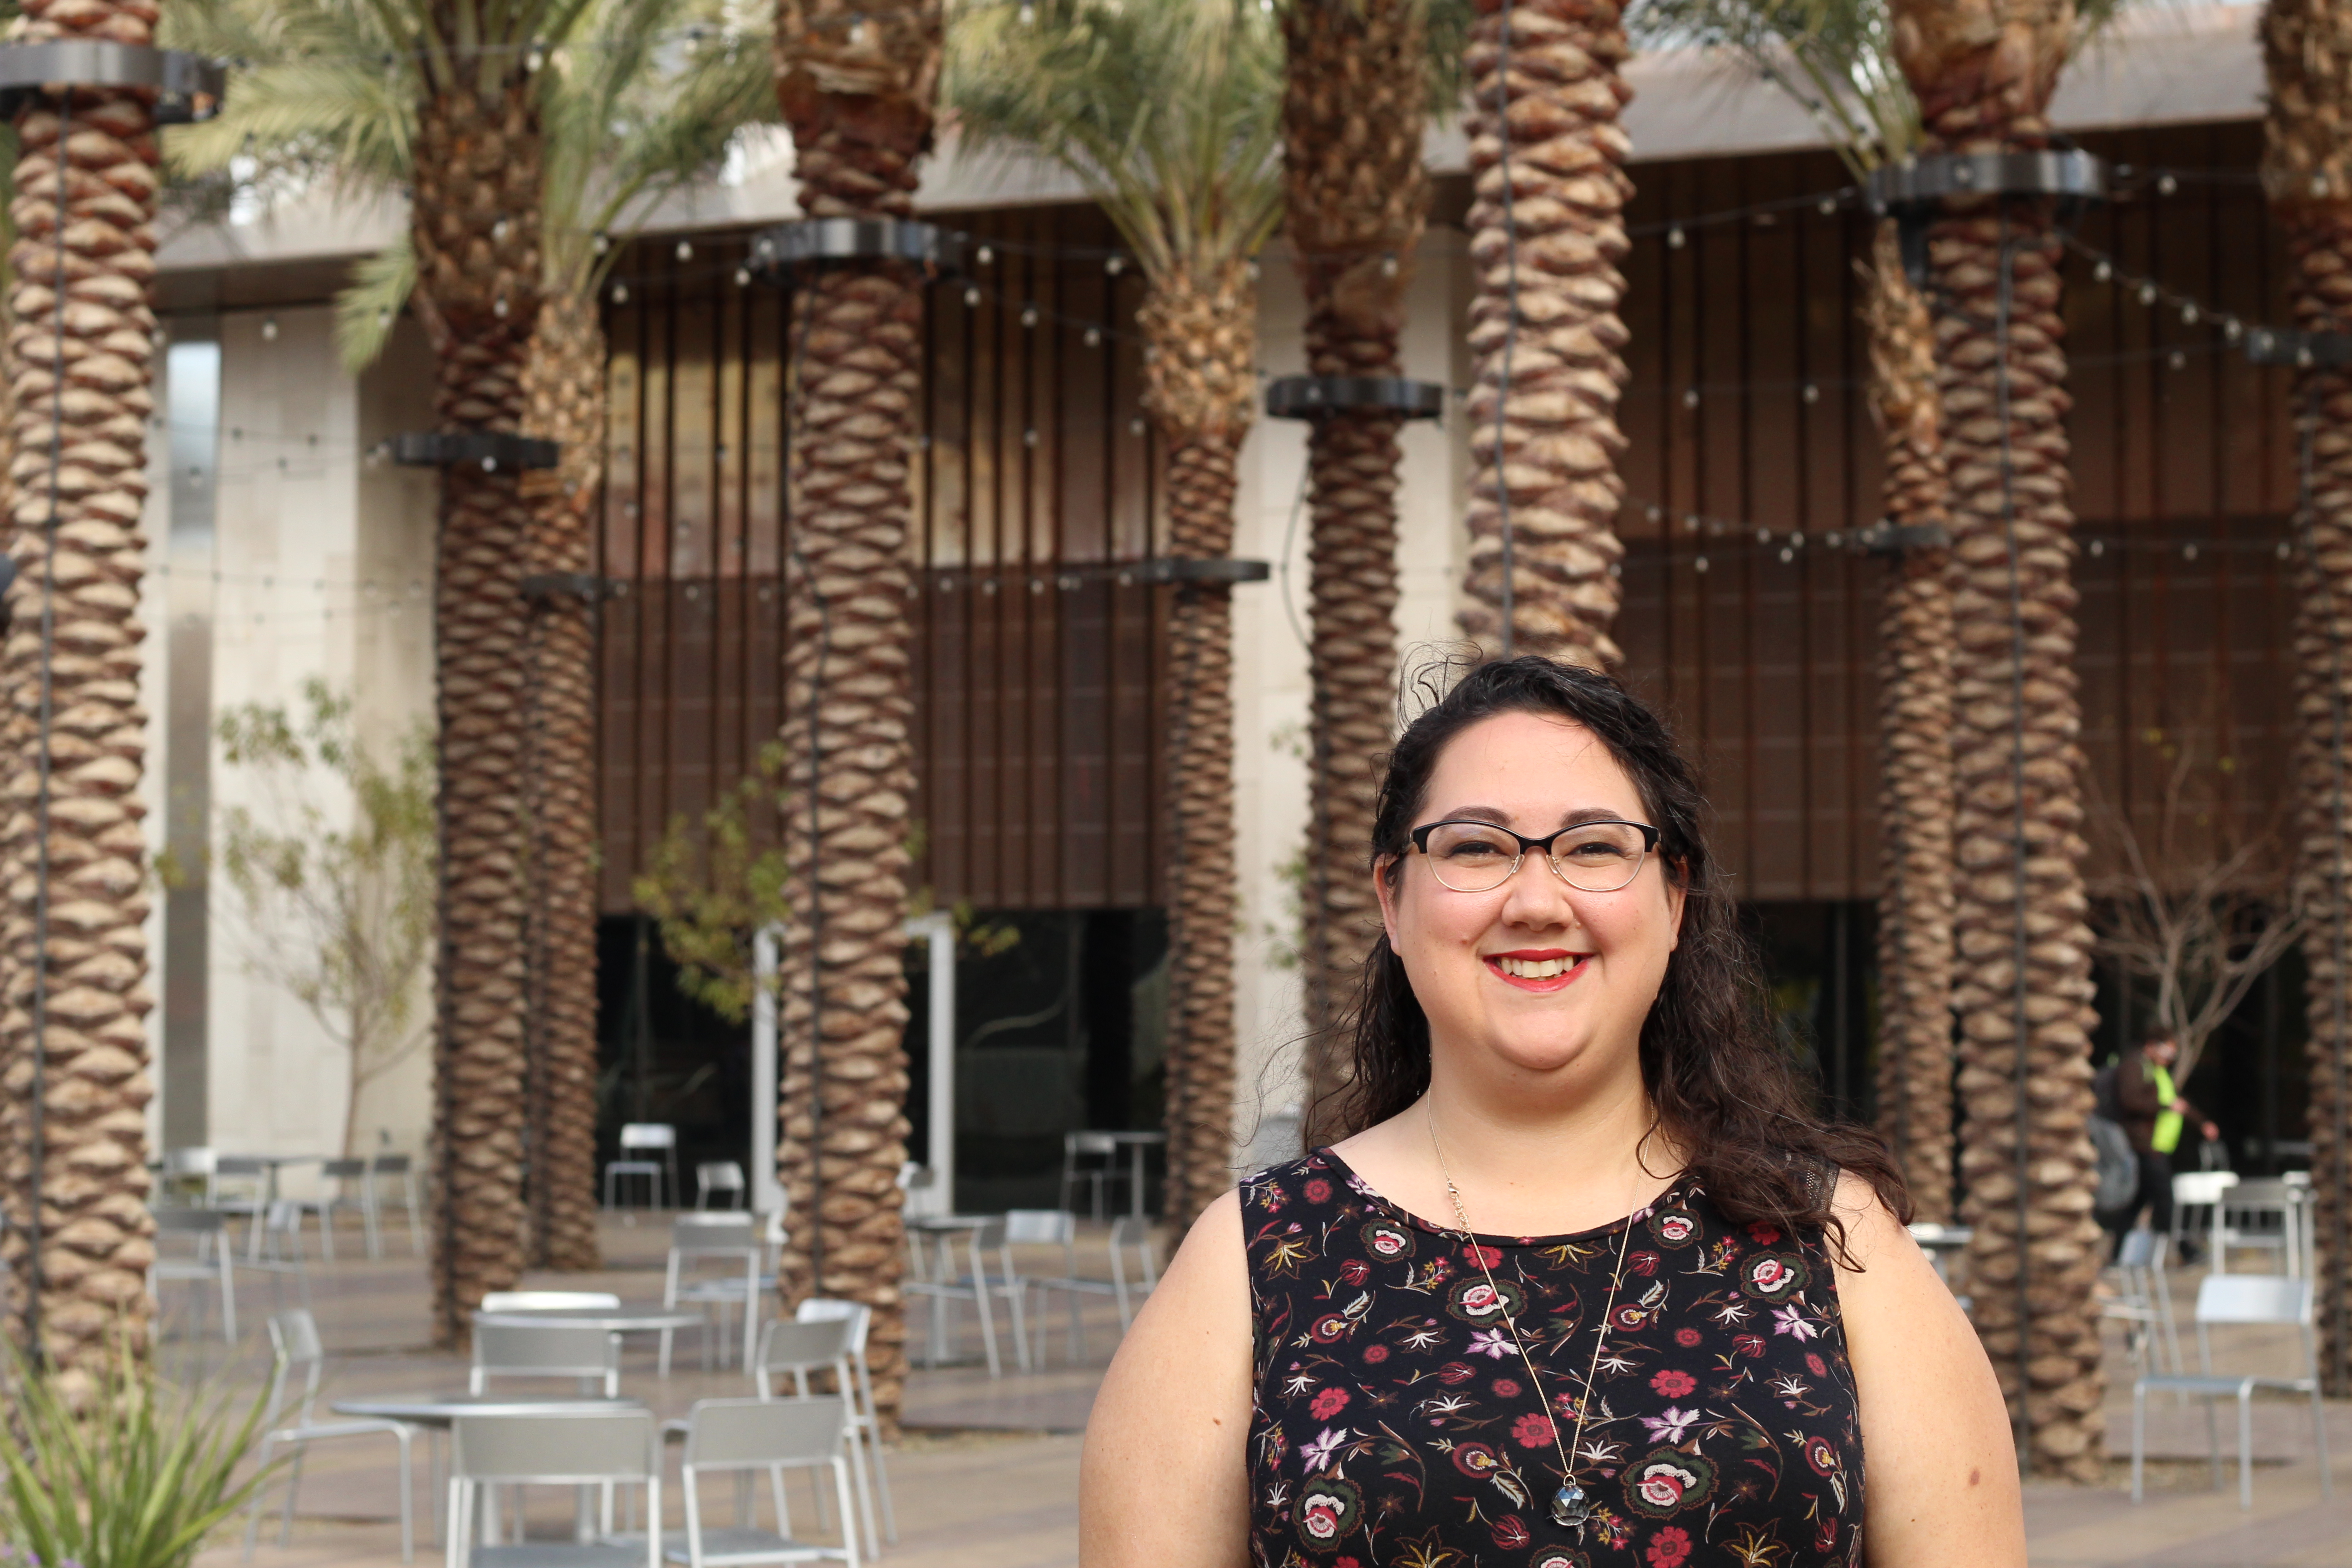 Jaime Ingrisano in front of the Student Pavilion at ASU's Tempe campus